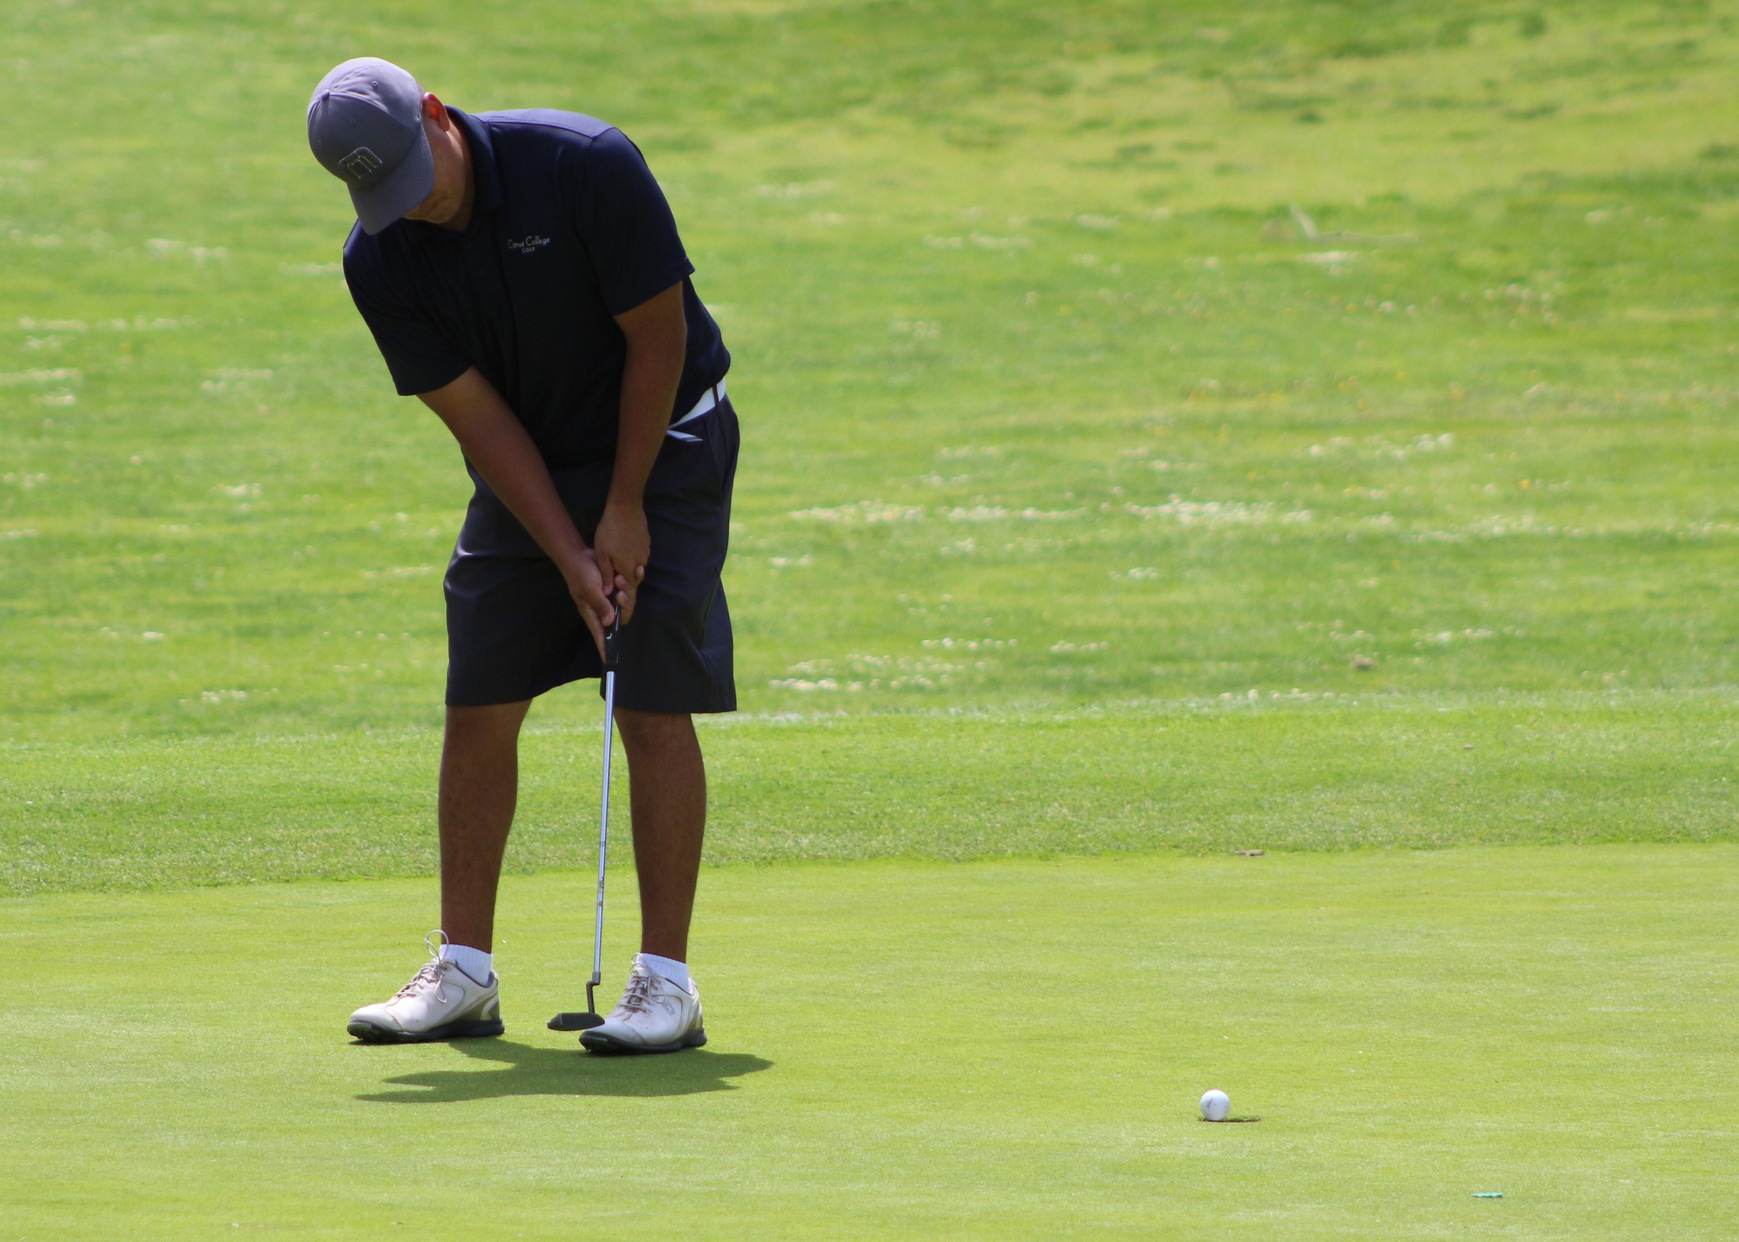 Michael Duran sinks a putt on the 5th green.